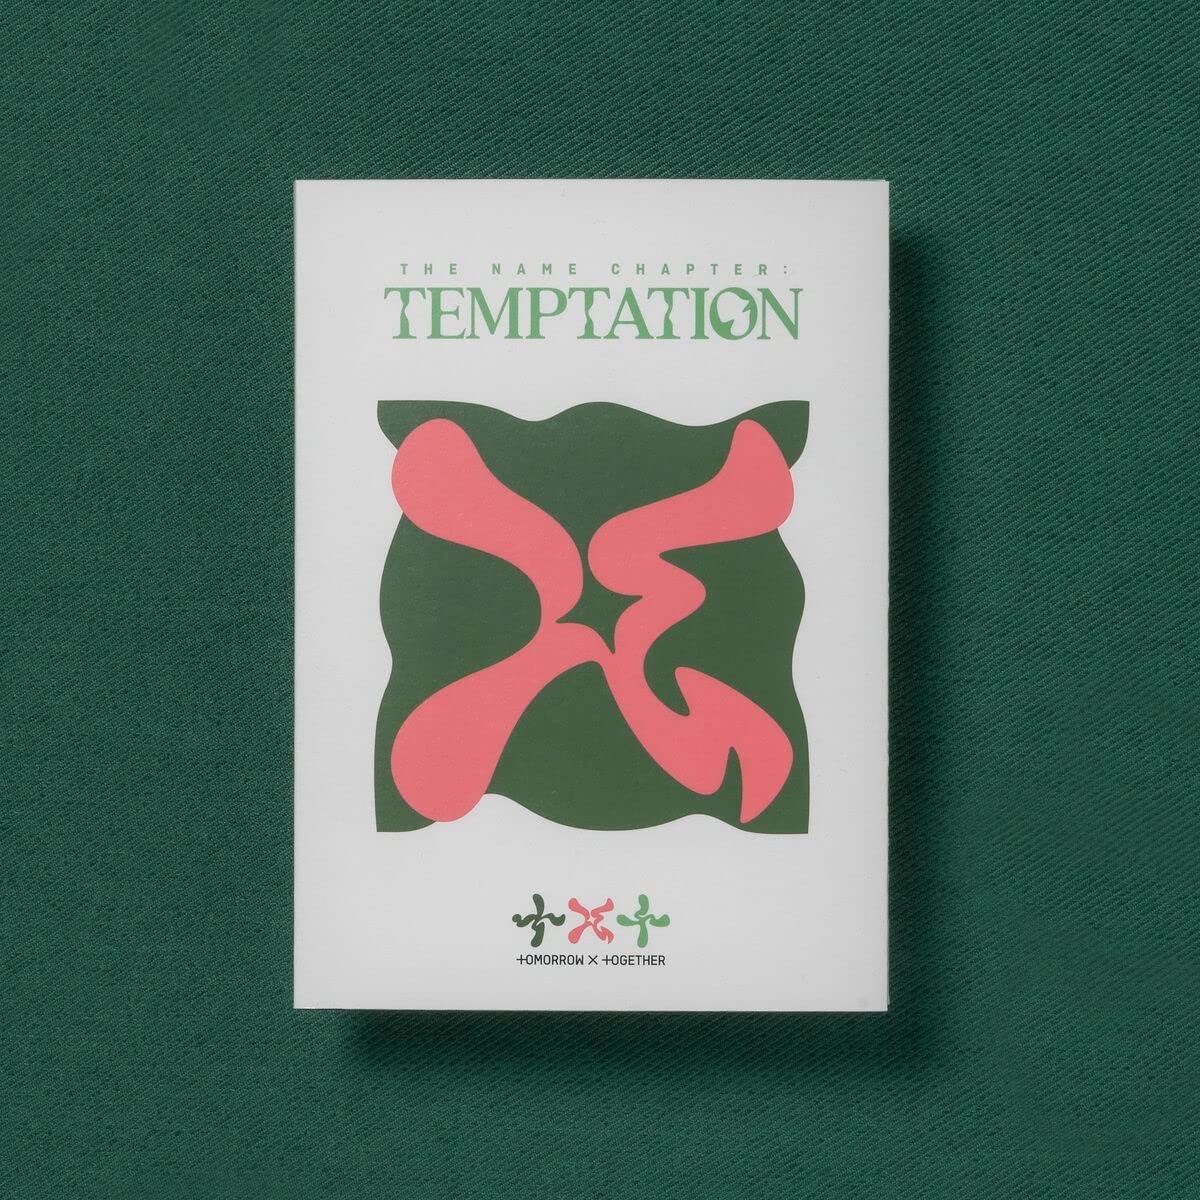 The Name Chapter: Temptation (lullaby)